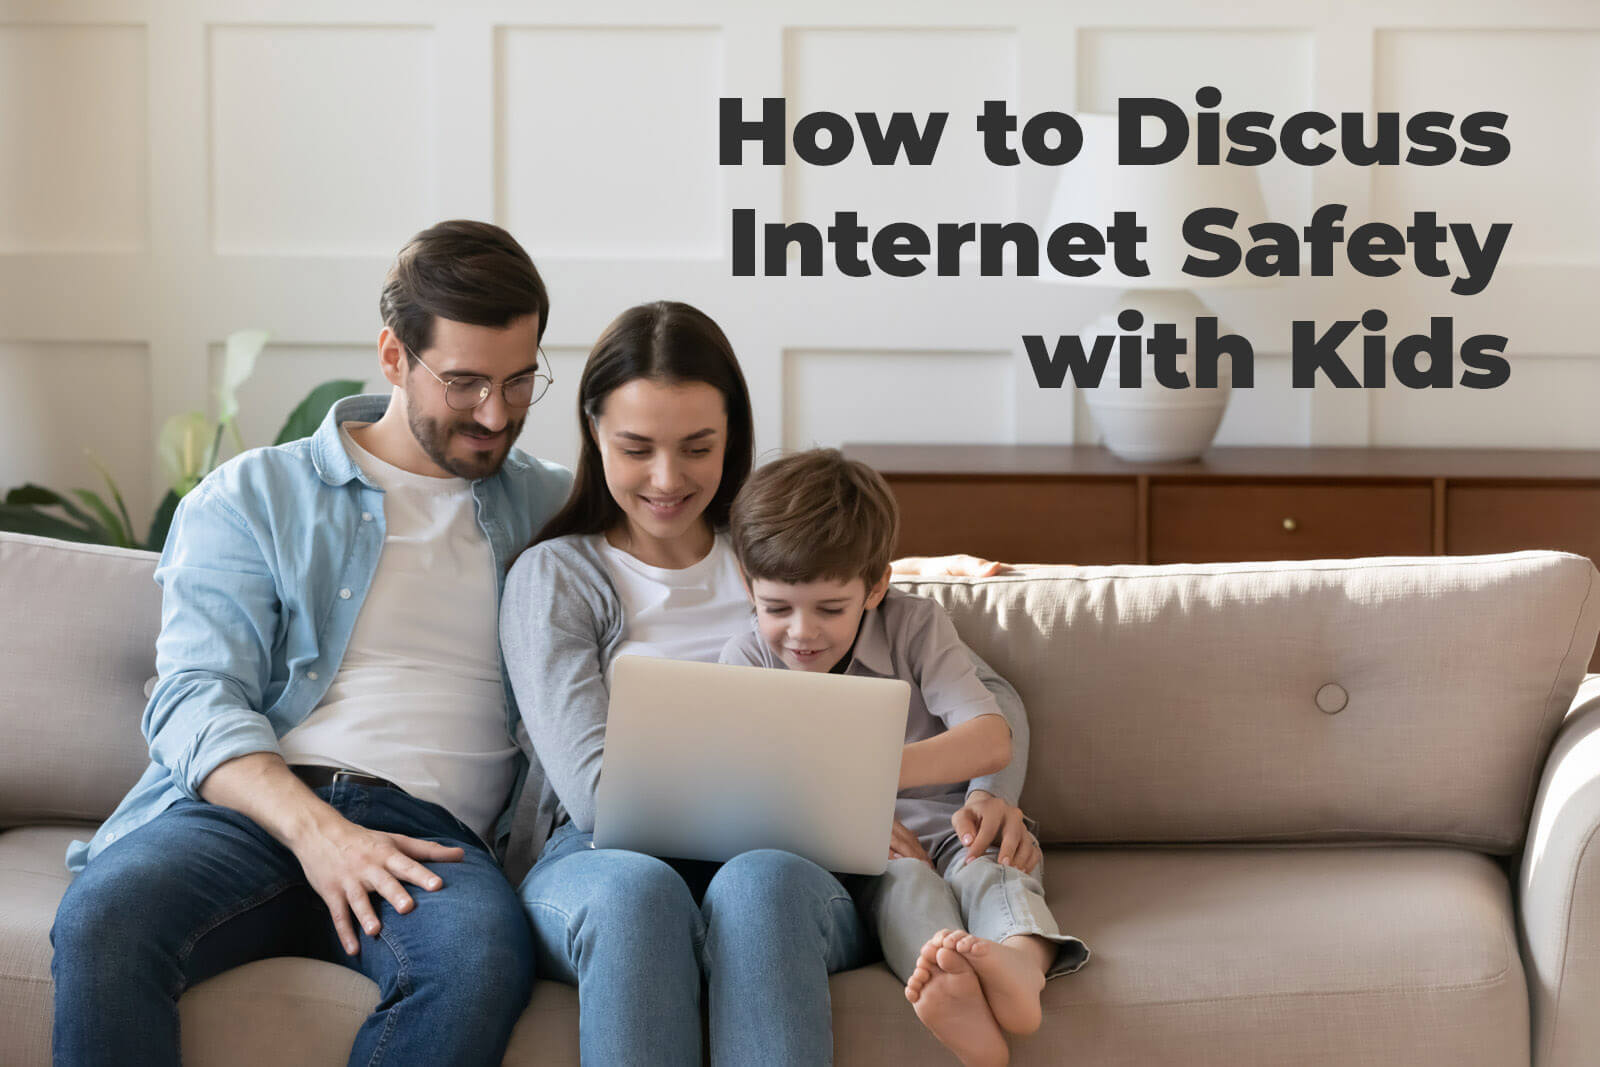 How to Discuss Internet Safety with Kids